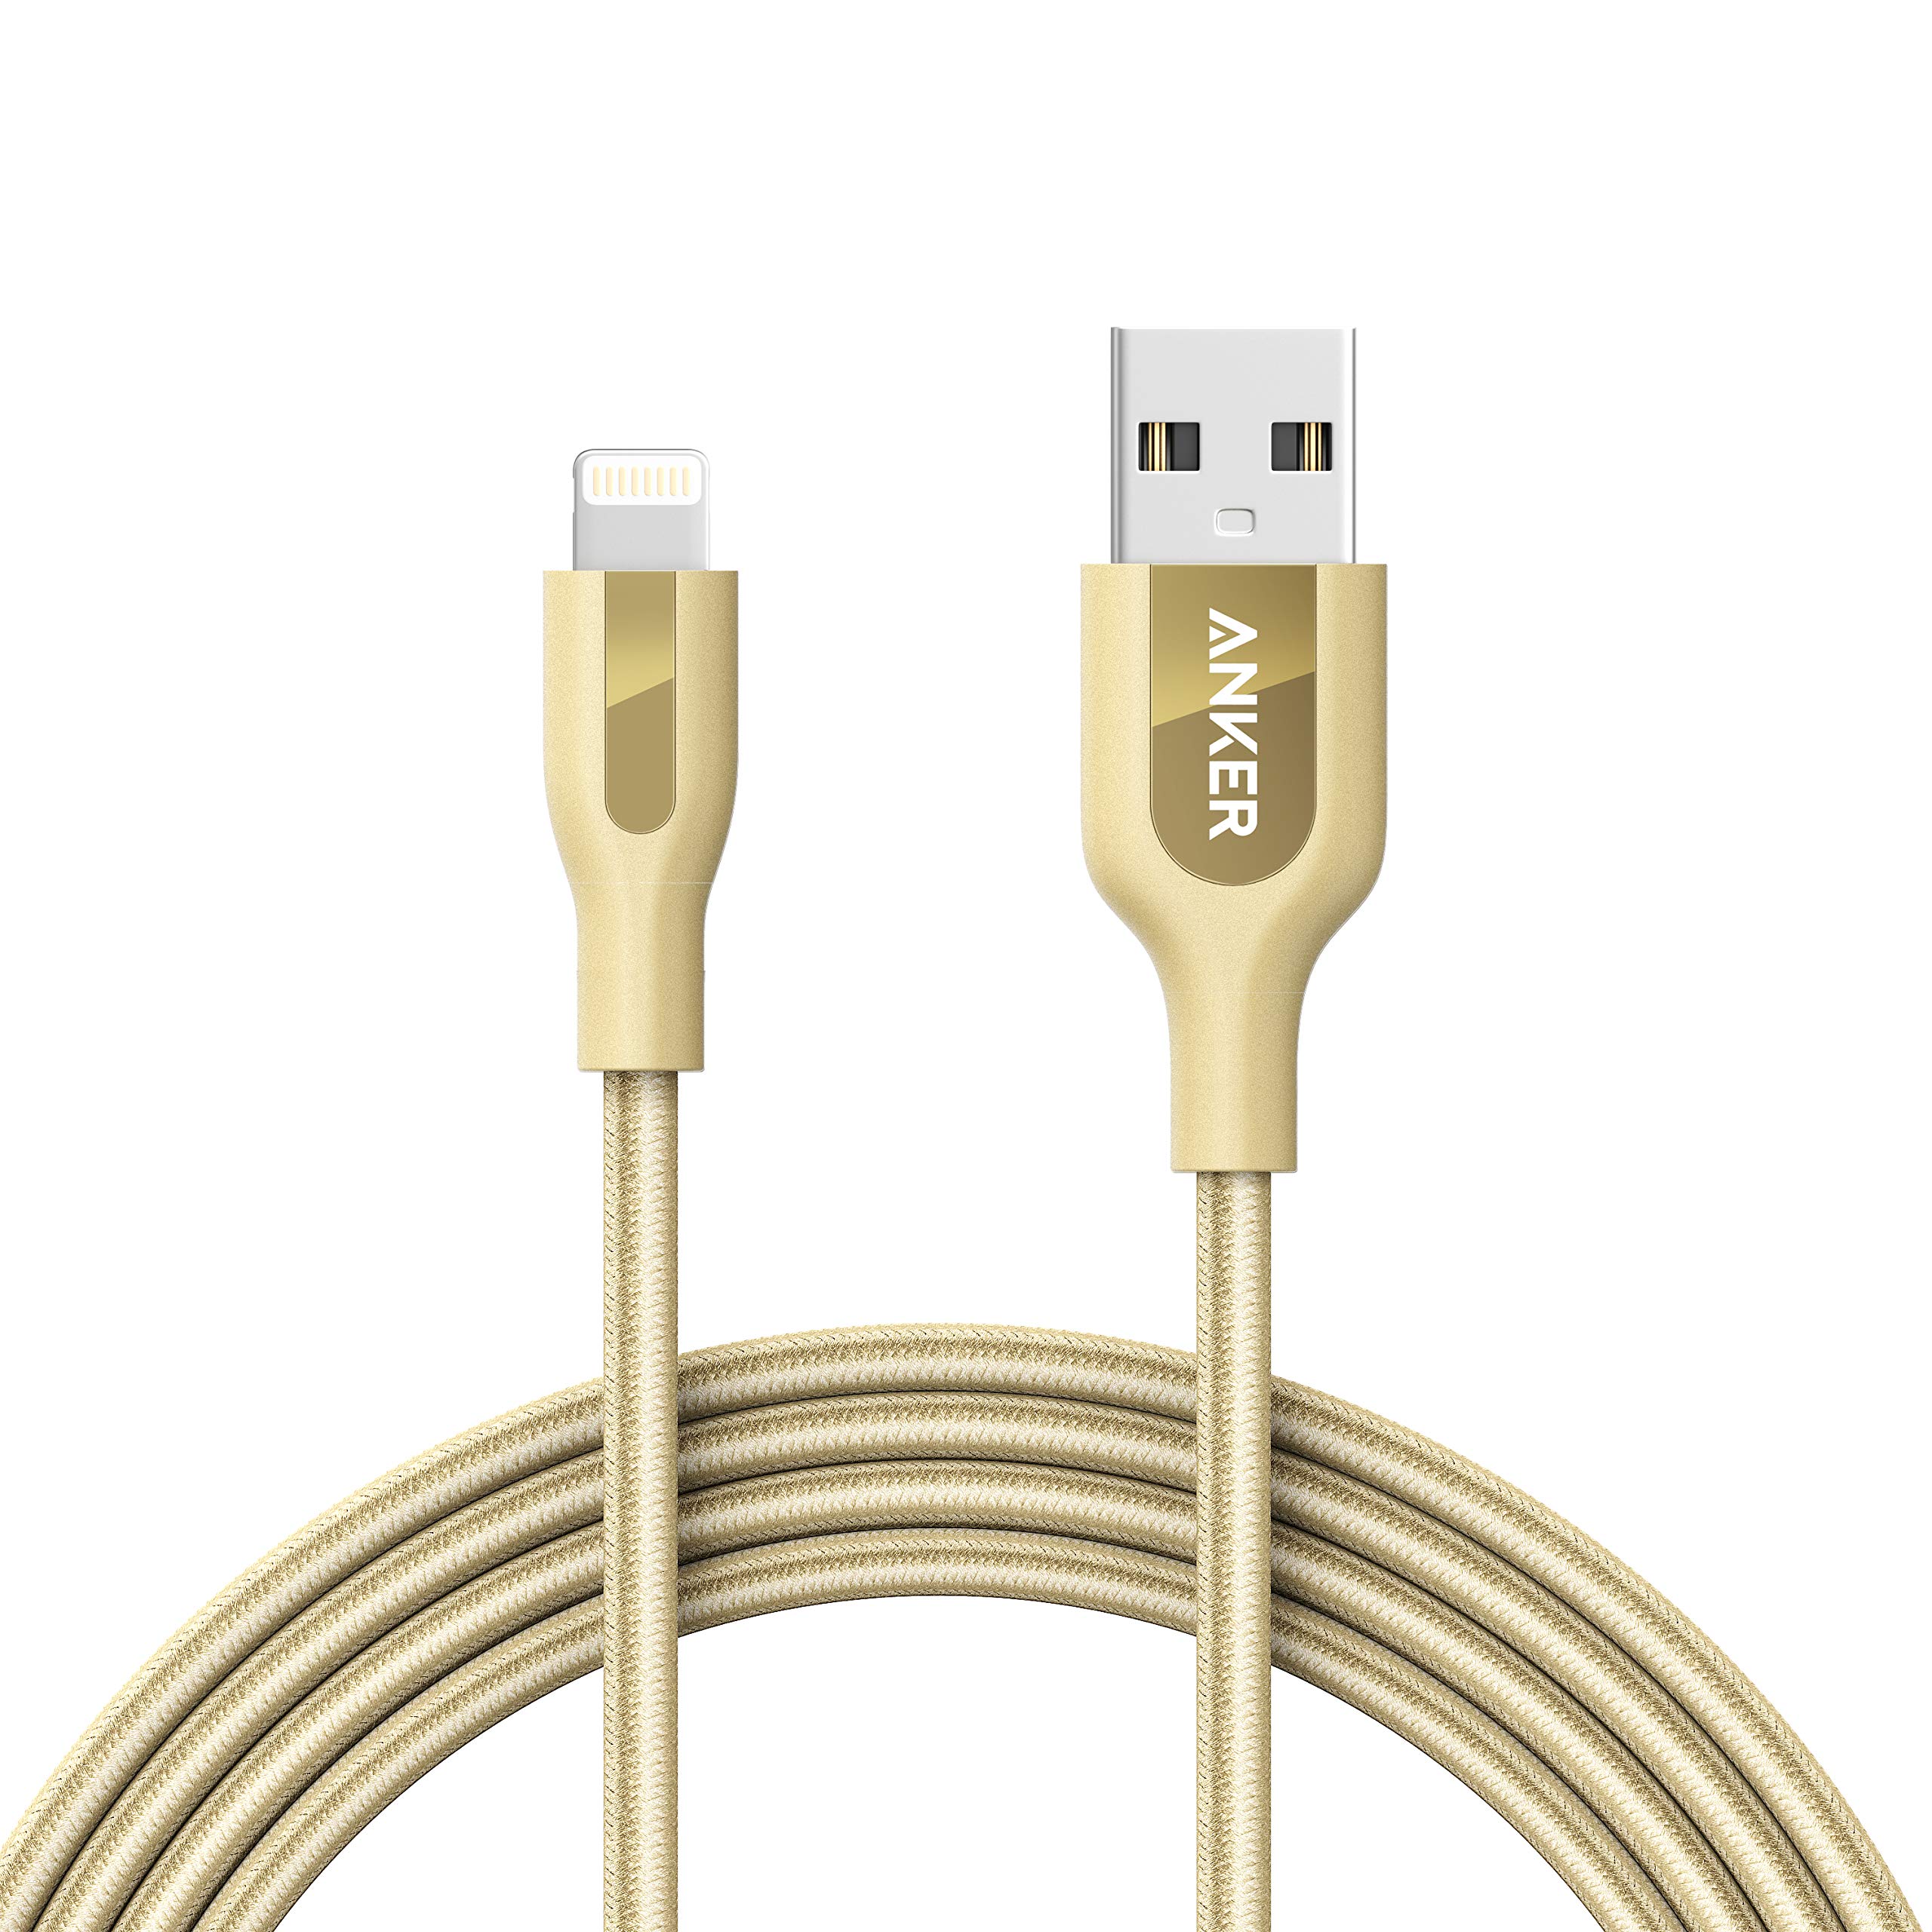 Book Cover Anker Powerline+ Lightning Cable (6ft) Durable and Fast Charging Cable [Double Braided Nylon] for iPhone Xs/XS Max/XR/X / 8/8 Plus / 7/7 Plus / 6/6 Plus / 5s / iPad and More(Golden)